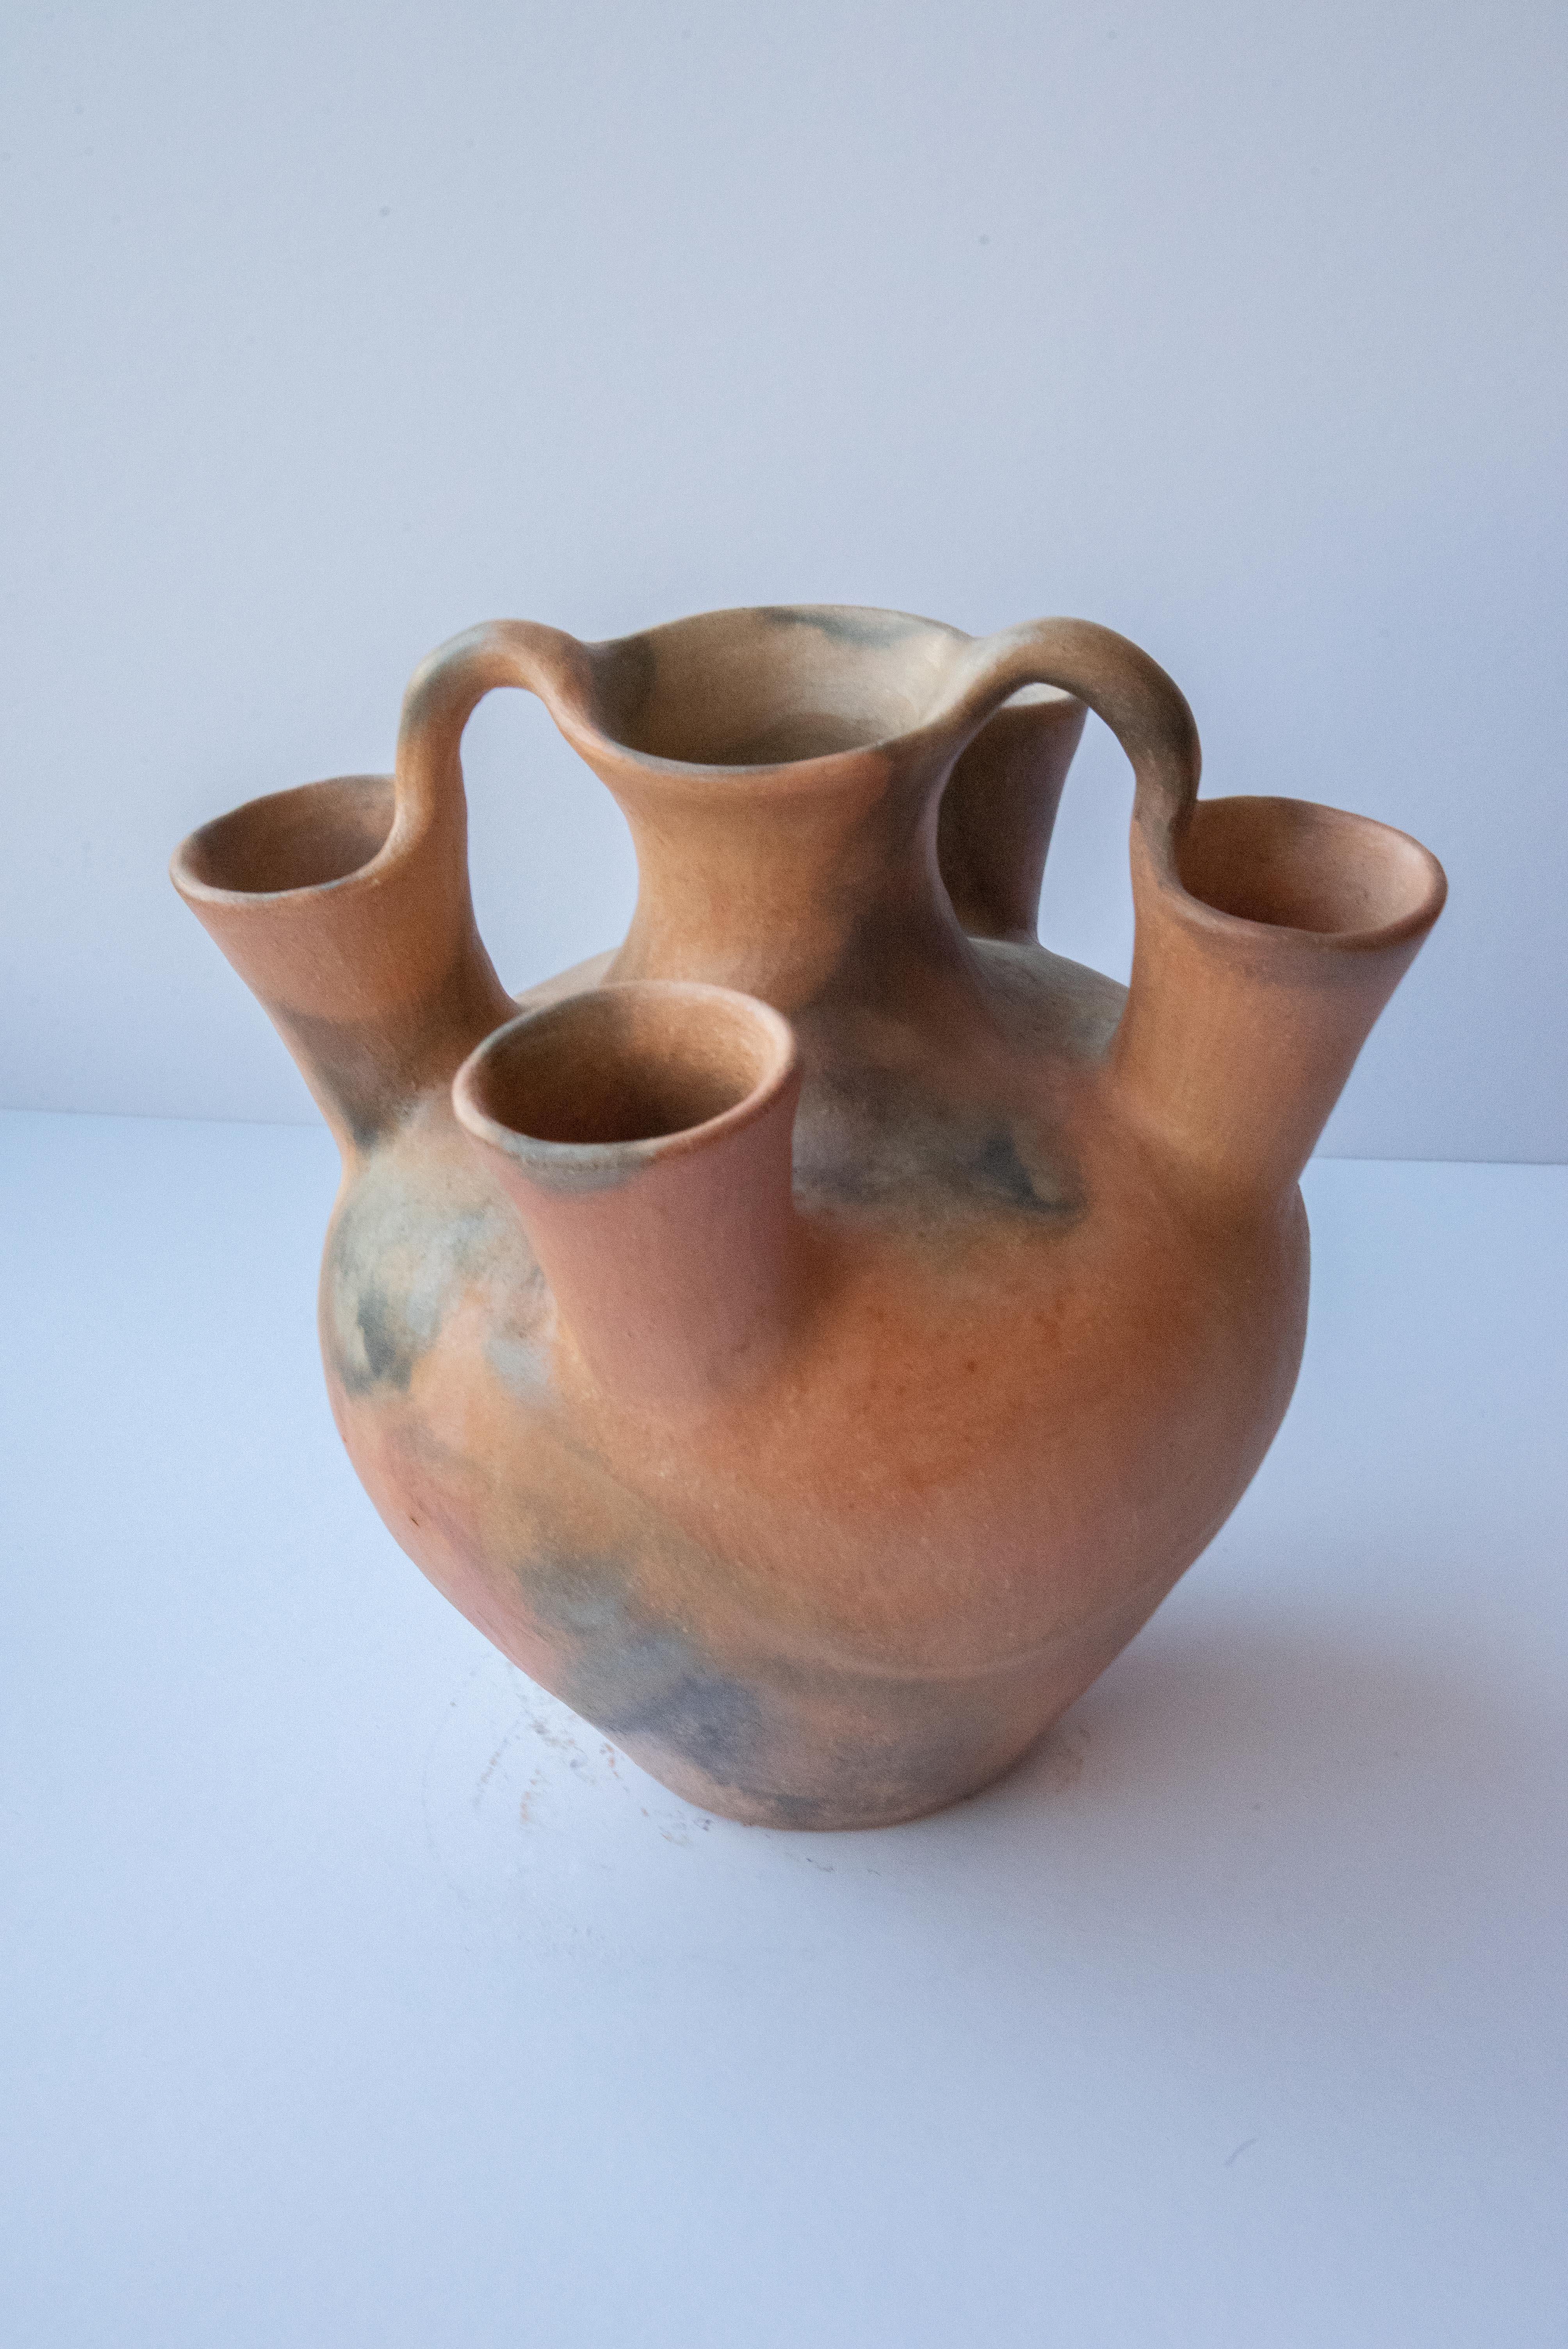 This impressive 4 mouth vessel is a one of a kind piece by master artisan Silvia Martínez. A representation of the folk art of Oaxaca, in Mexico, this special water container is made from clay from the region and burned in a traditional oven. The